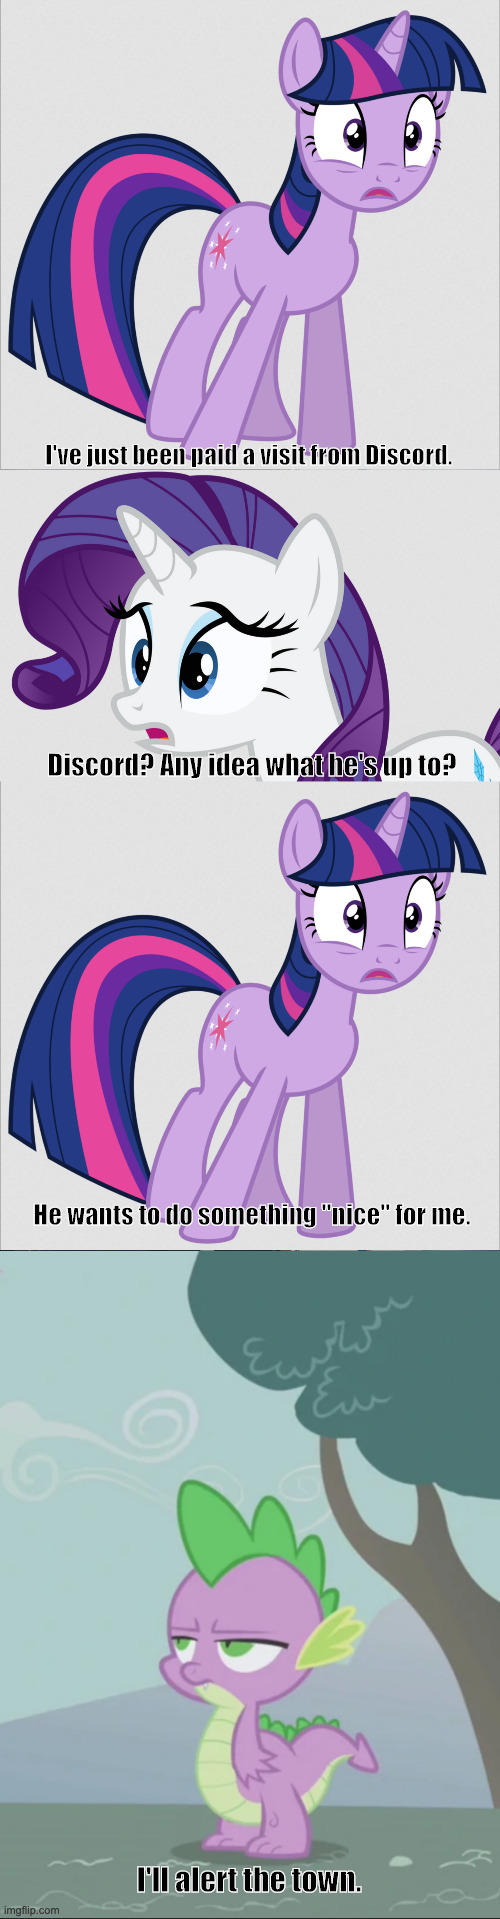 I've just been paid a visit from Discord. Discord? Any idea what he's up to? He wants to do something "nice" for me. I'll alert the town. | image tagged in twilight sparkle worried,rarity worried,spike unimpressed,star trek,partial quote | made w/ Imgflip meme maker